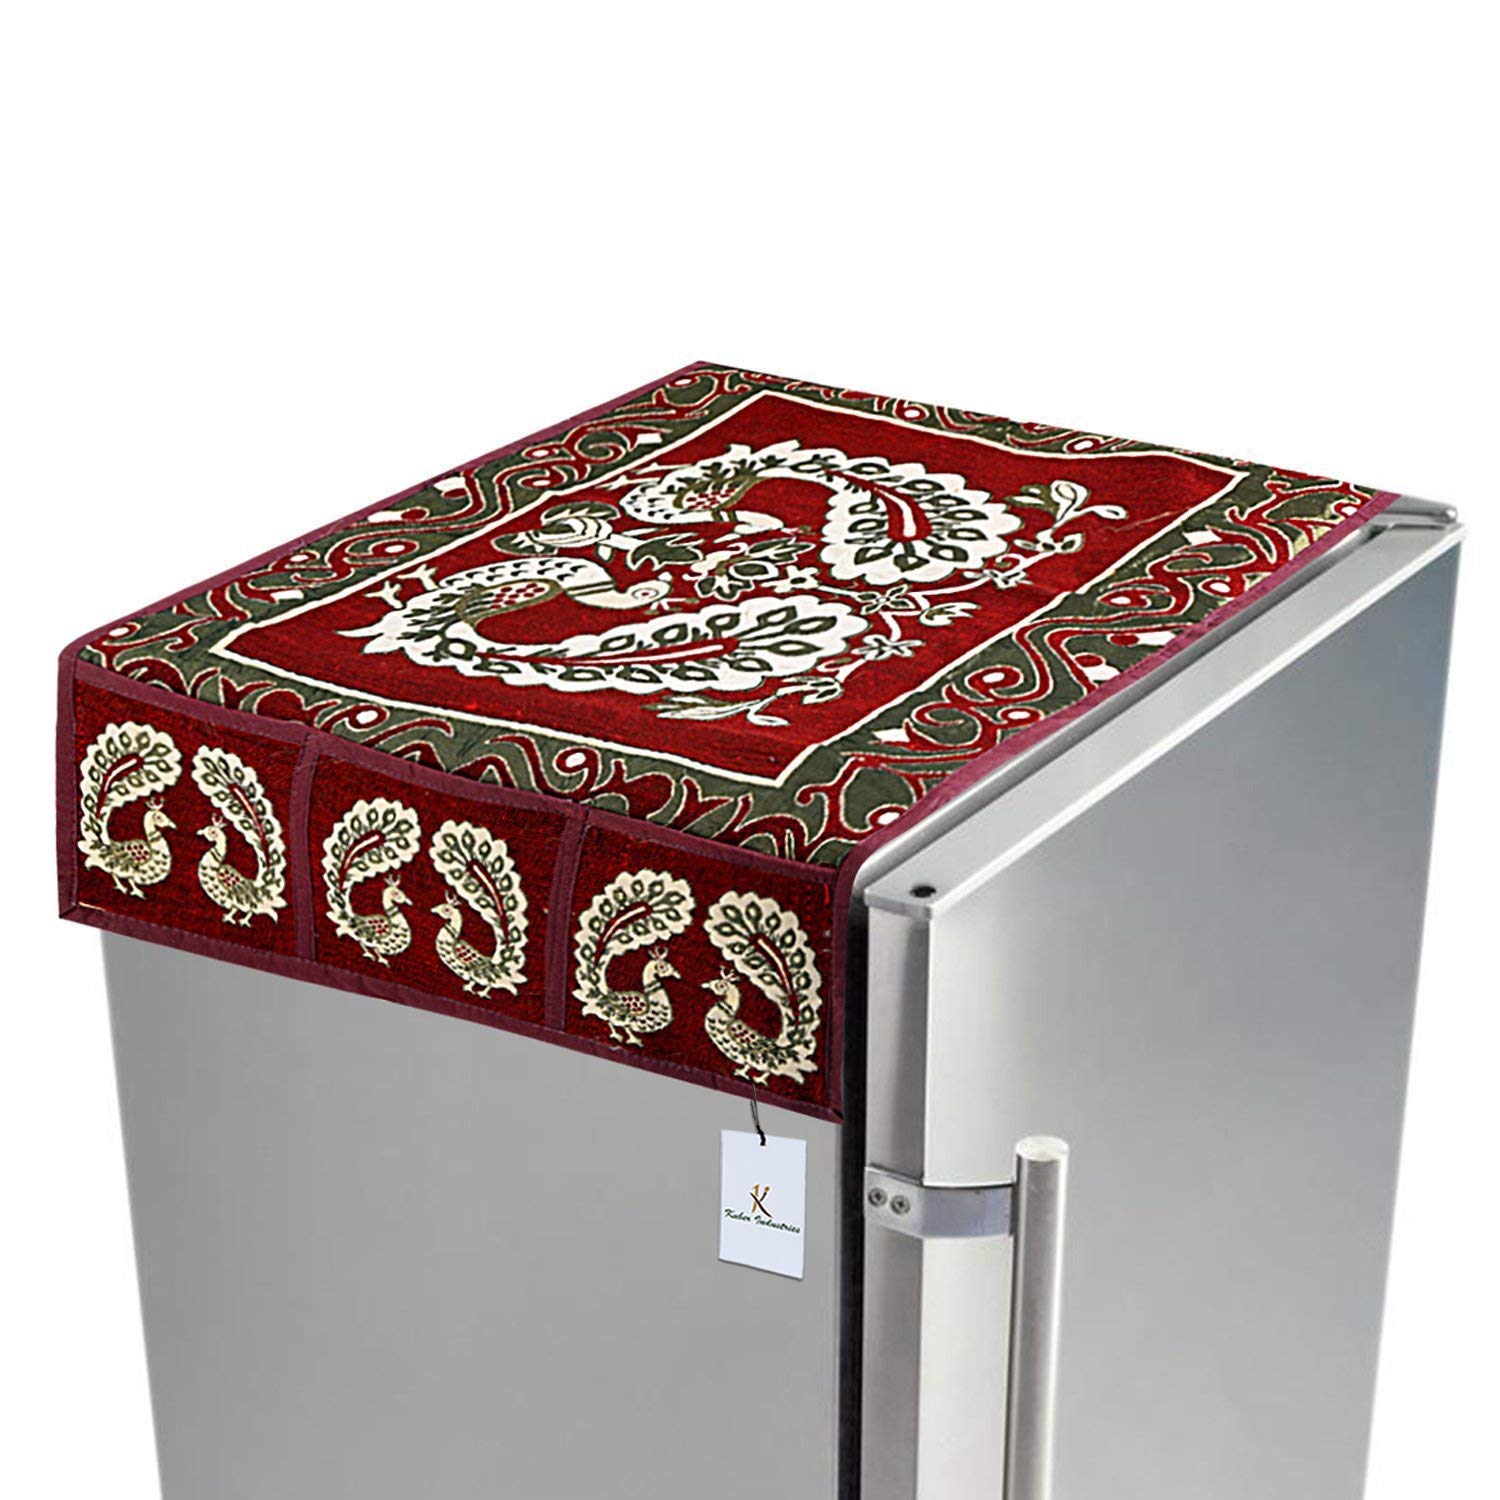 Kuber Industries Fridge Top Cover|Traditional Peacock Design & Cotton Material|6 Utility Side Pockets With Plain Border|Size 94 x 54 CM, Pack of 1 (Red)